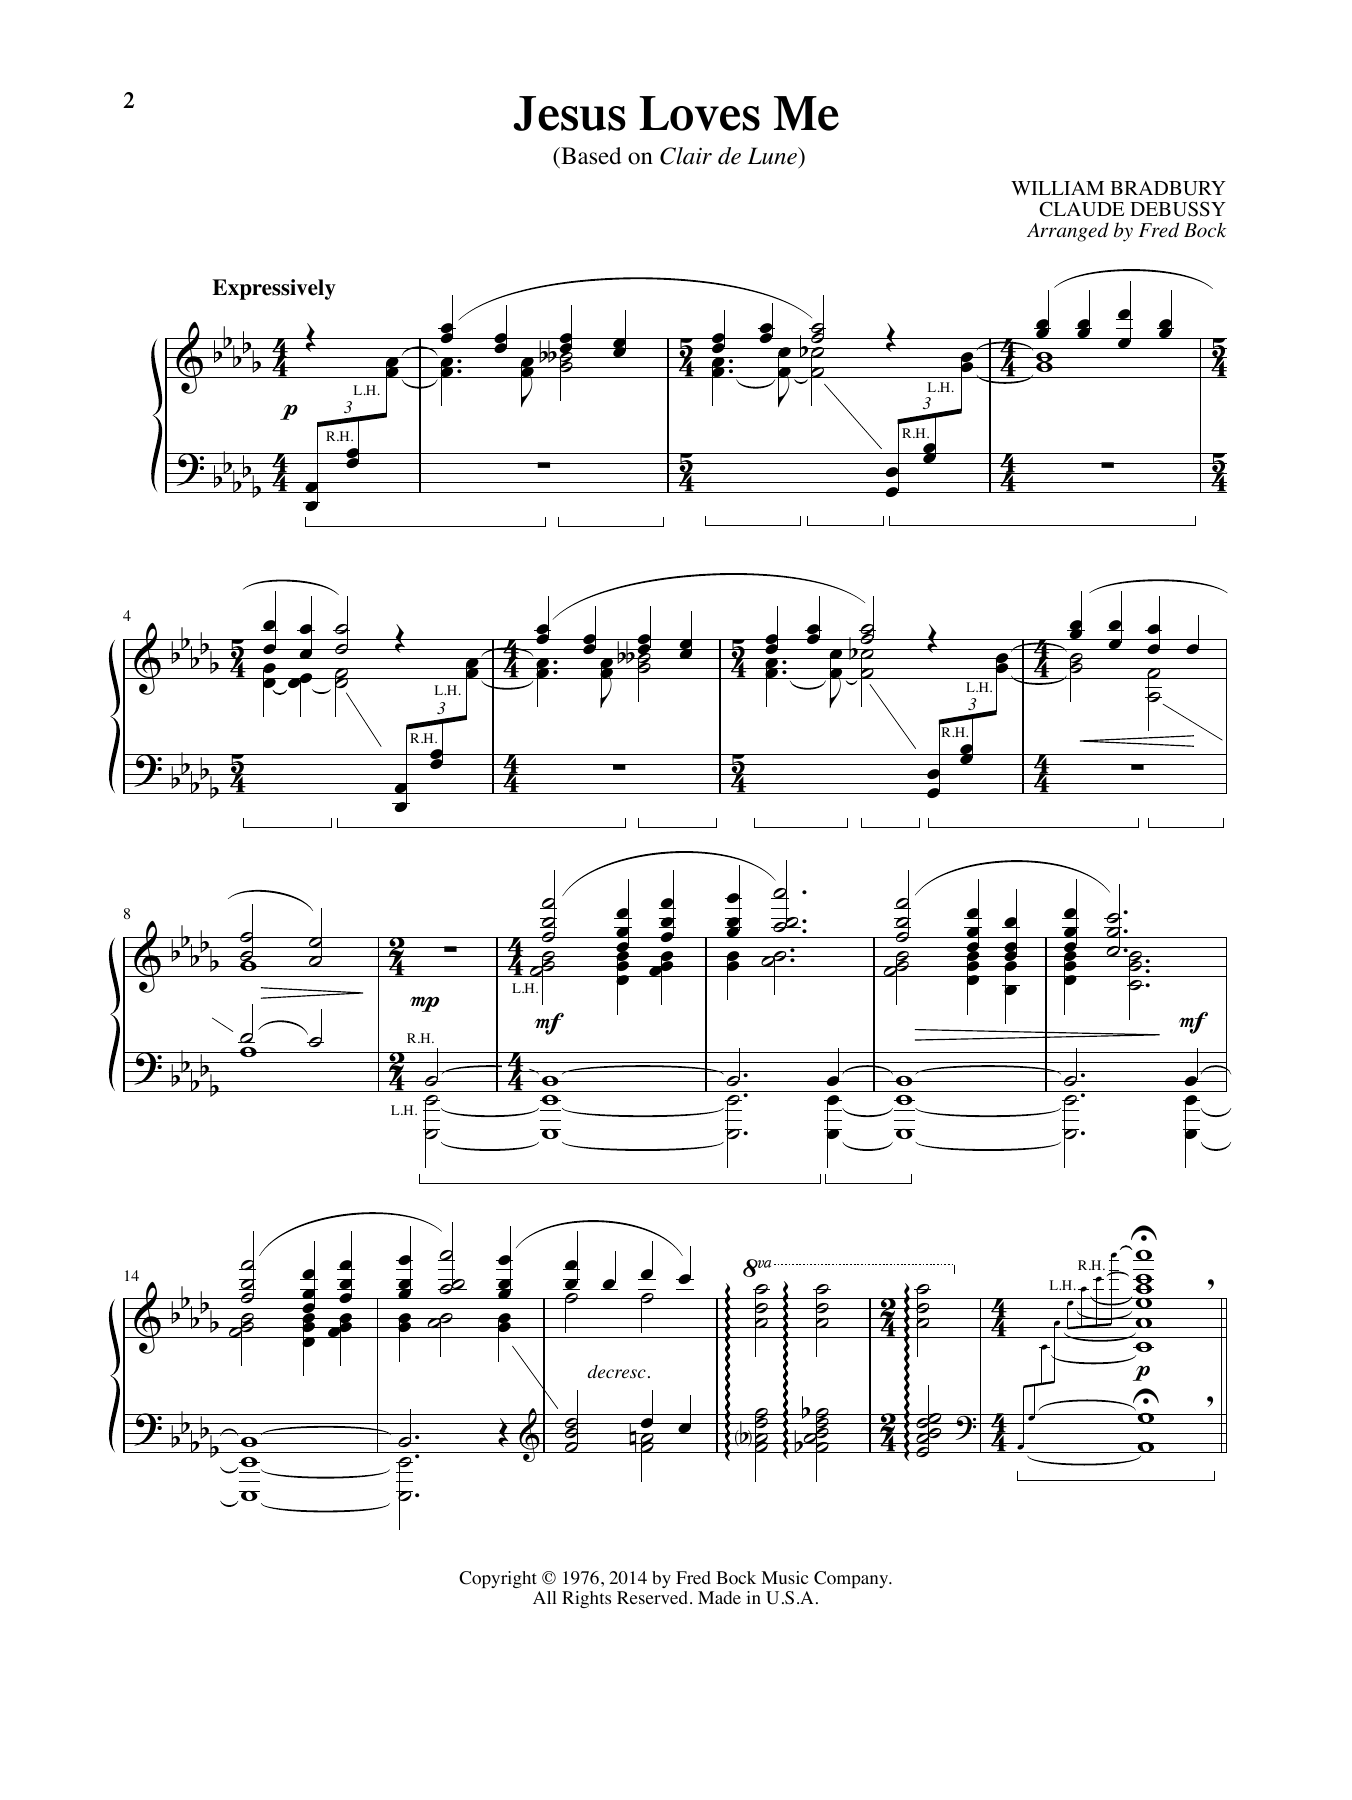 Download William Bradbury and Claude Debussy Jesus Loves Me (with Clair de Lune) (ar Sheet Music